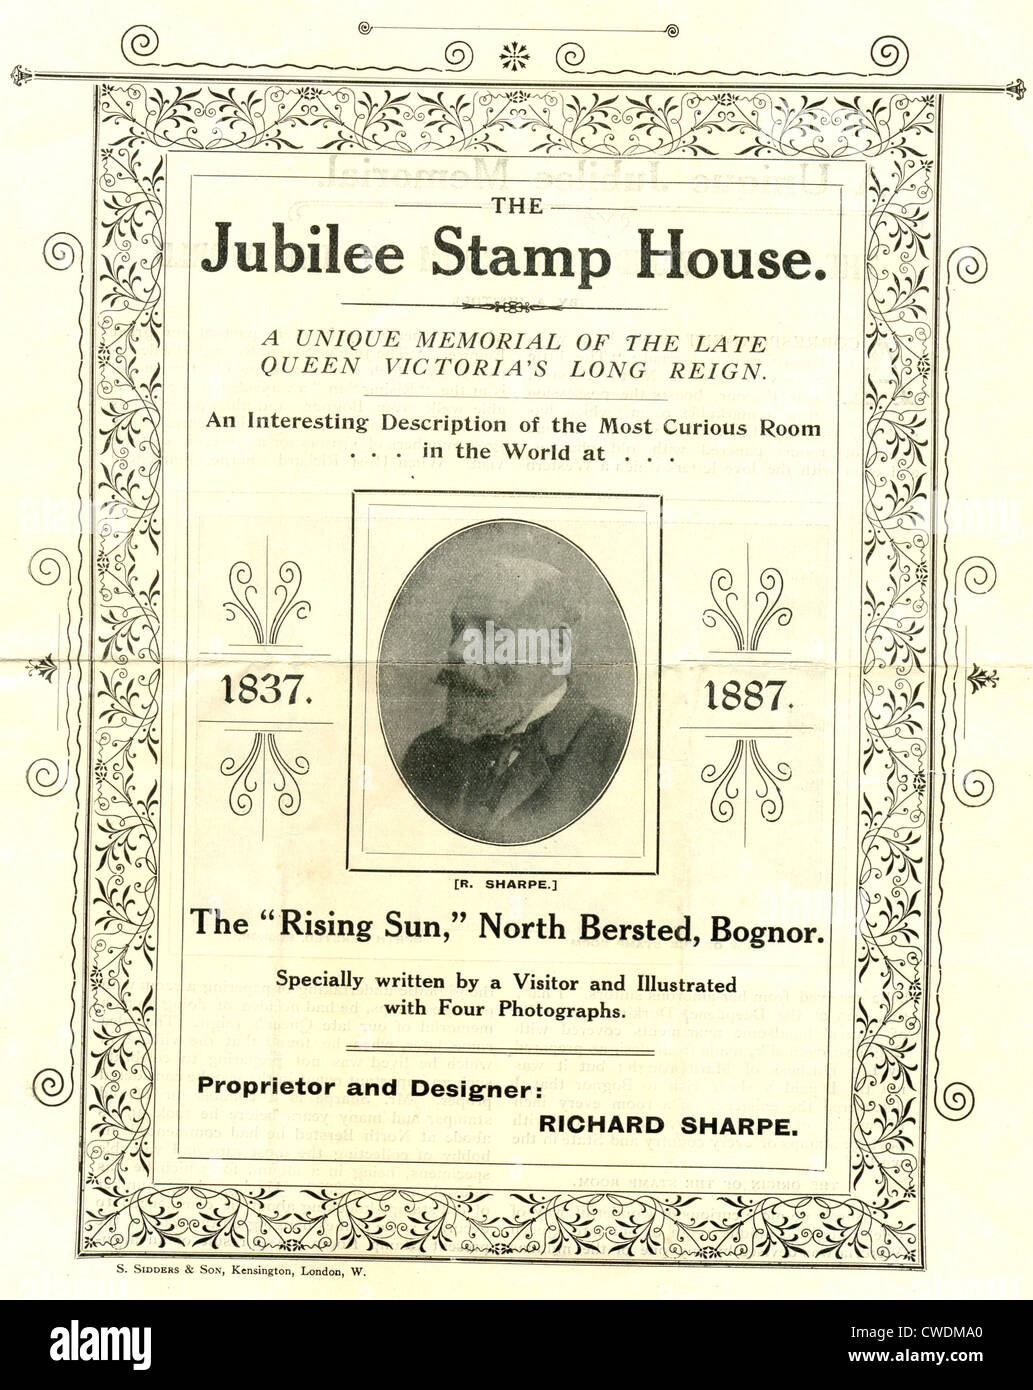 Souvenir leaflet of the Jubilee Stamp House Stock Photo